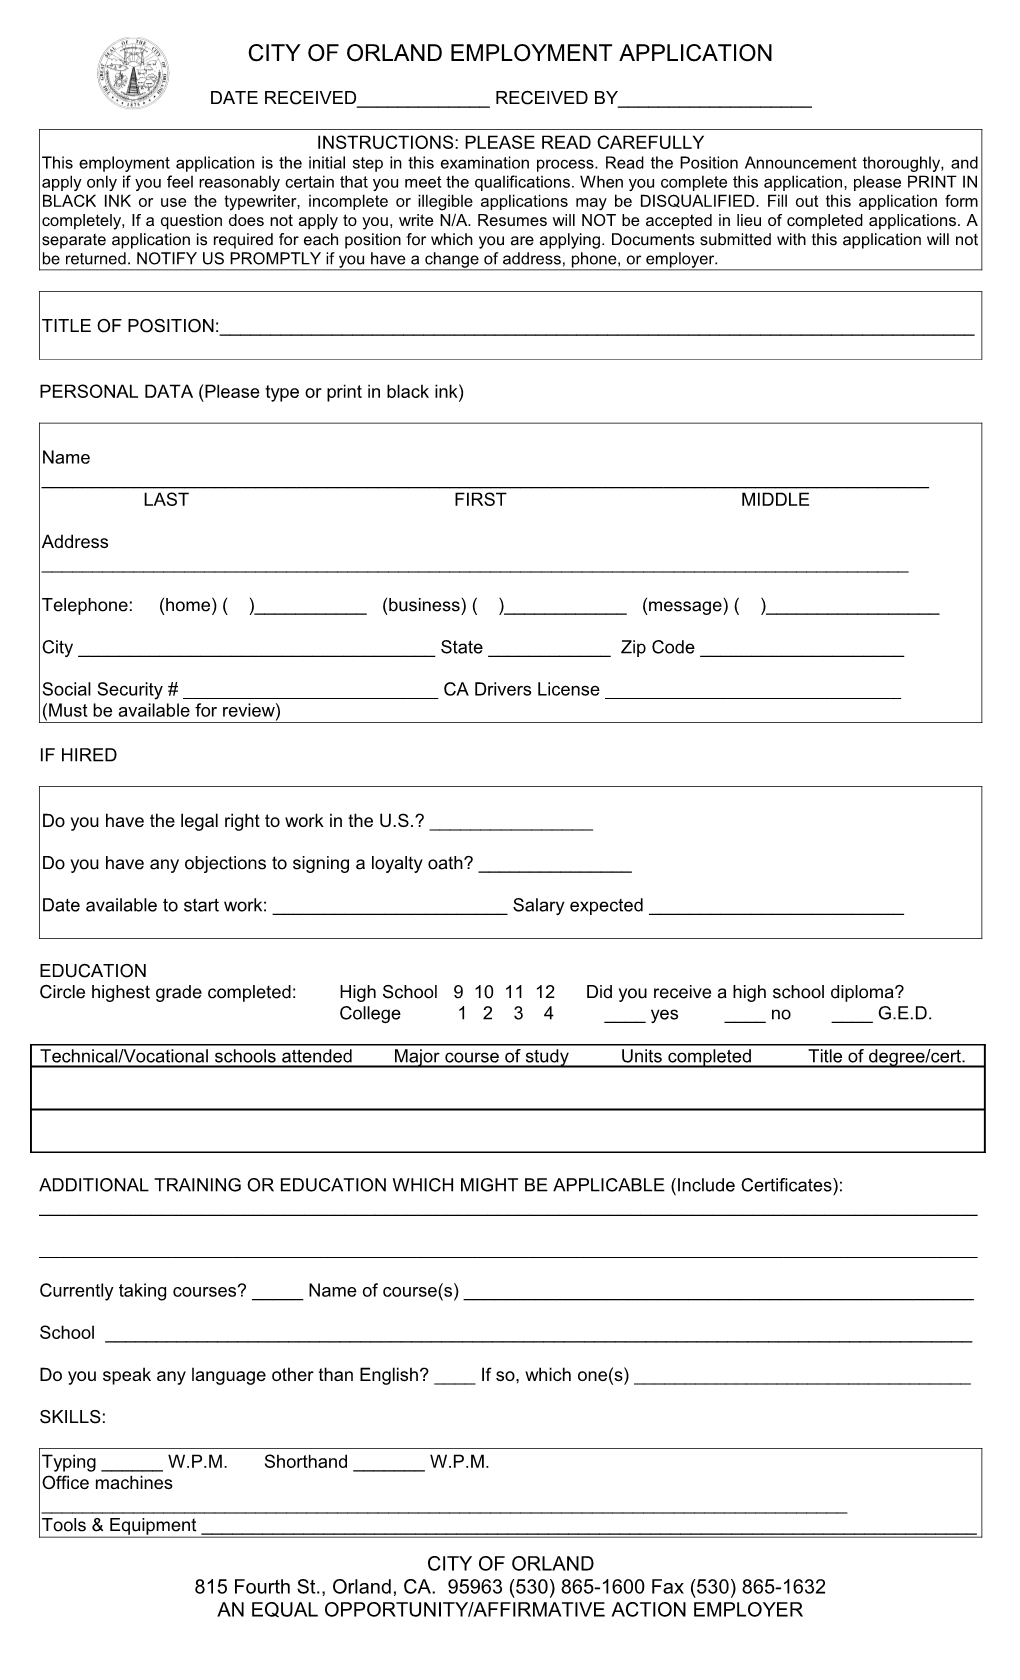 City of Orland Employment Application